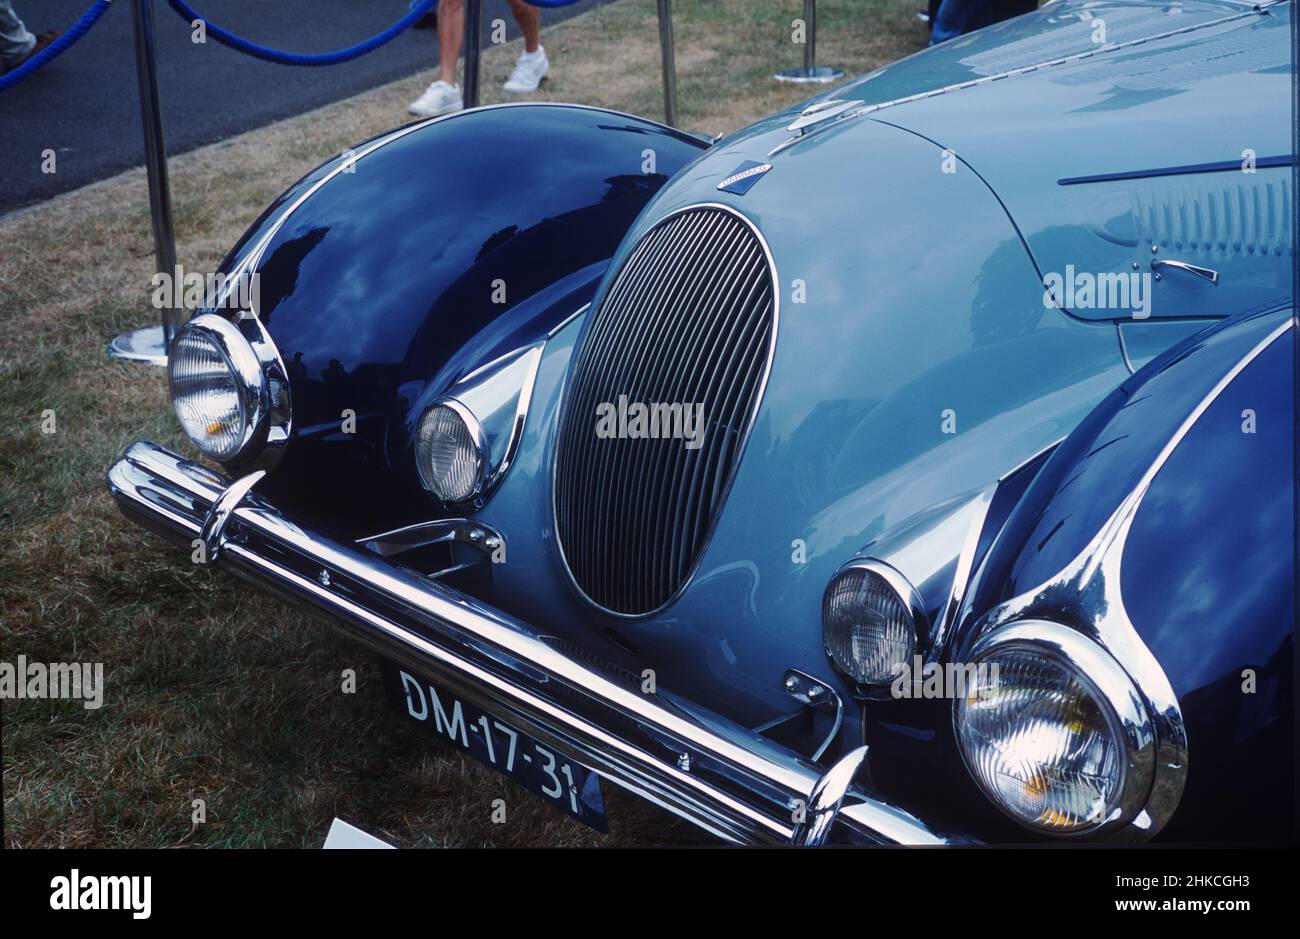 The shapely curves of a 1938 Talbot-Darracq with coachwork by Figoni & Falaschi, on display at the 2001 Goodwood Festival of Speed. Stock Photo